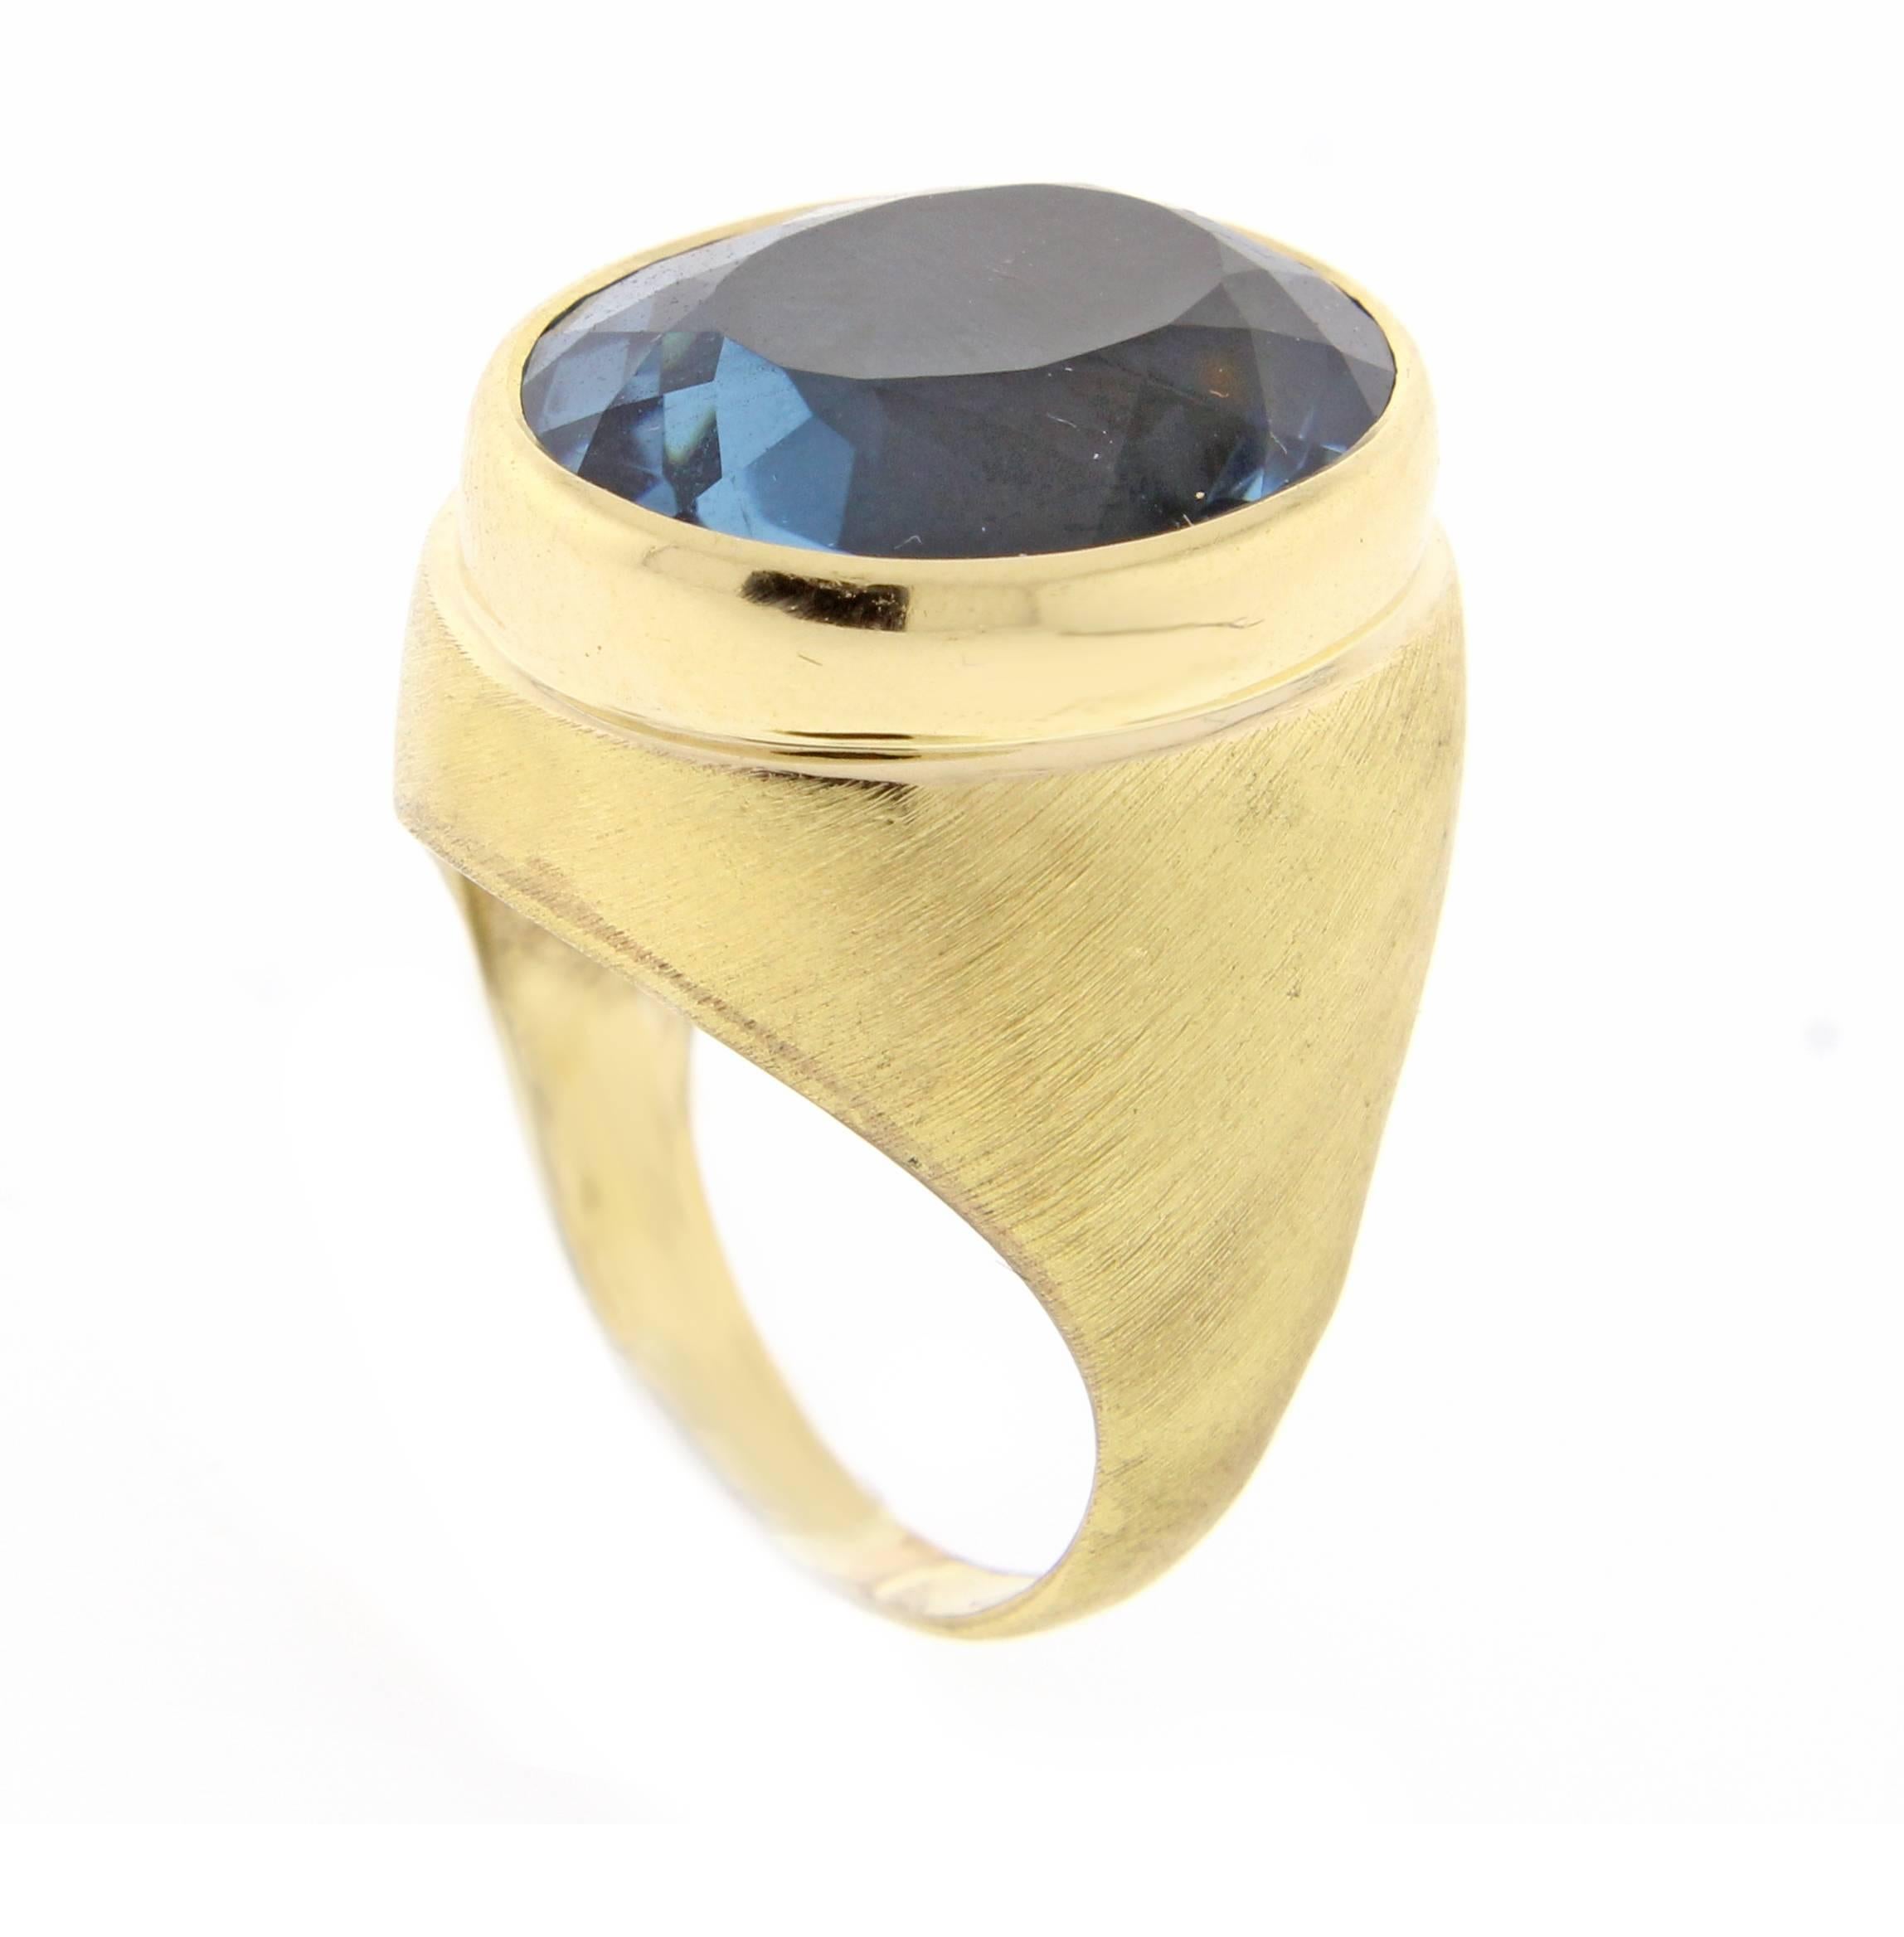 Impressive oval blue topaz ring by renowned Brazilian jeweler Haroldo Burle Marx (1911-1991). The ring features a bezel 18*14.5mm oval rich blue topaz weighing 17 carats set in a brushed 18 karat gold setting. Size 6 adjustable